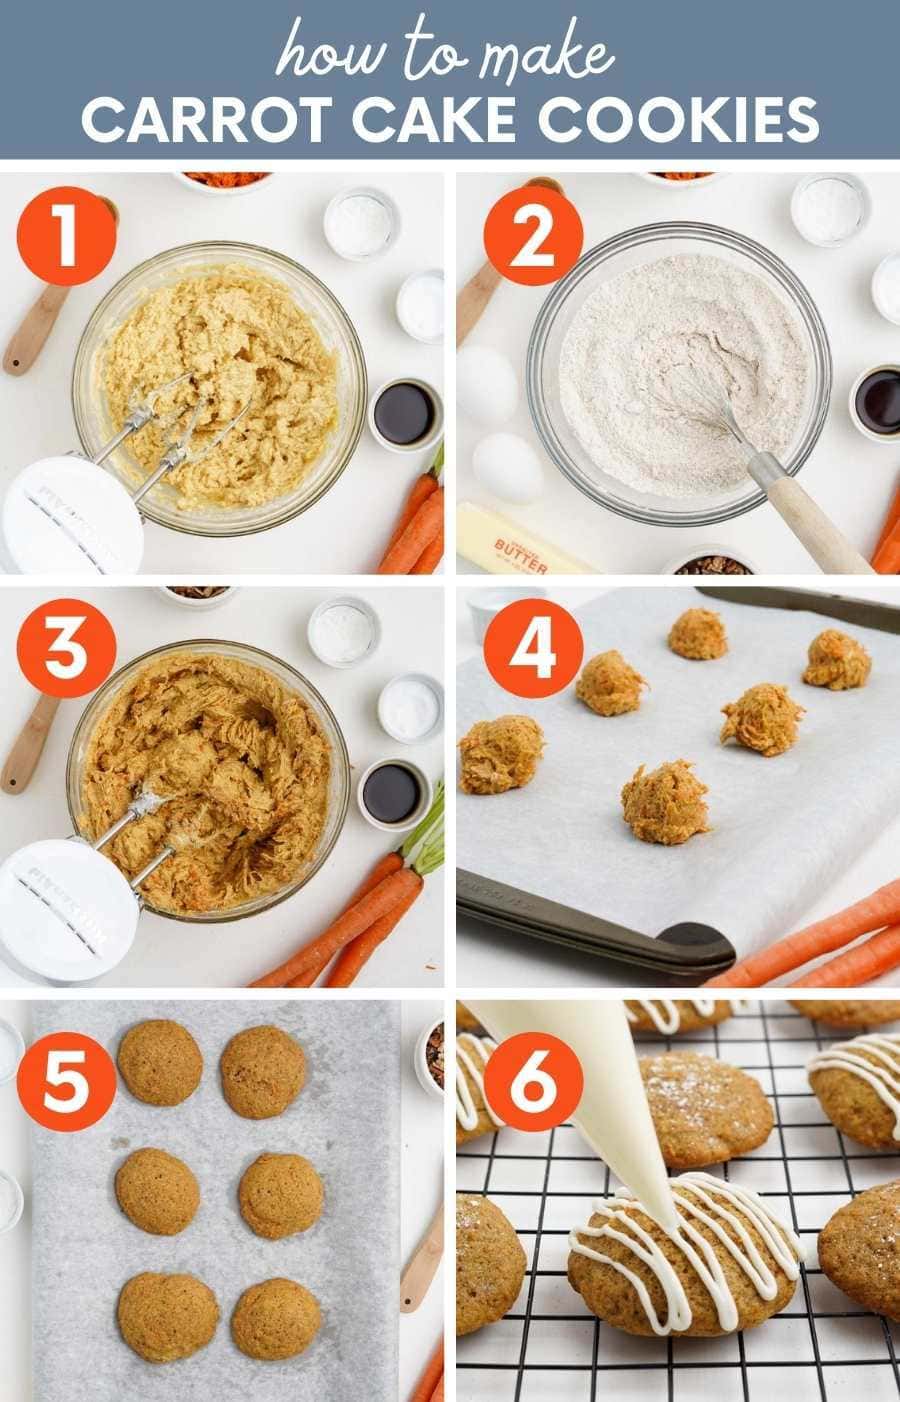 A divided image shows the steps for making carrot cake cookies